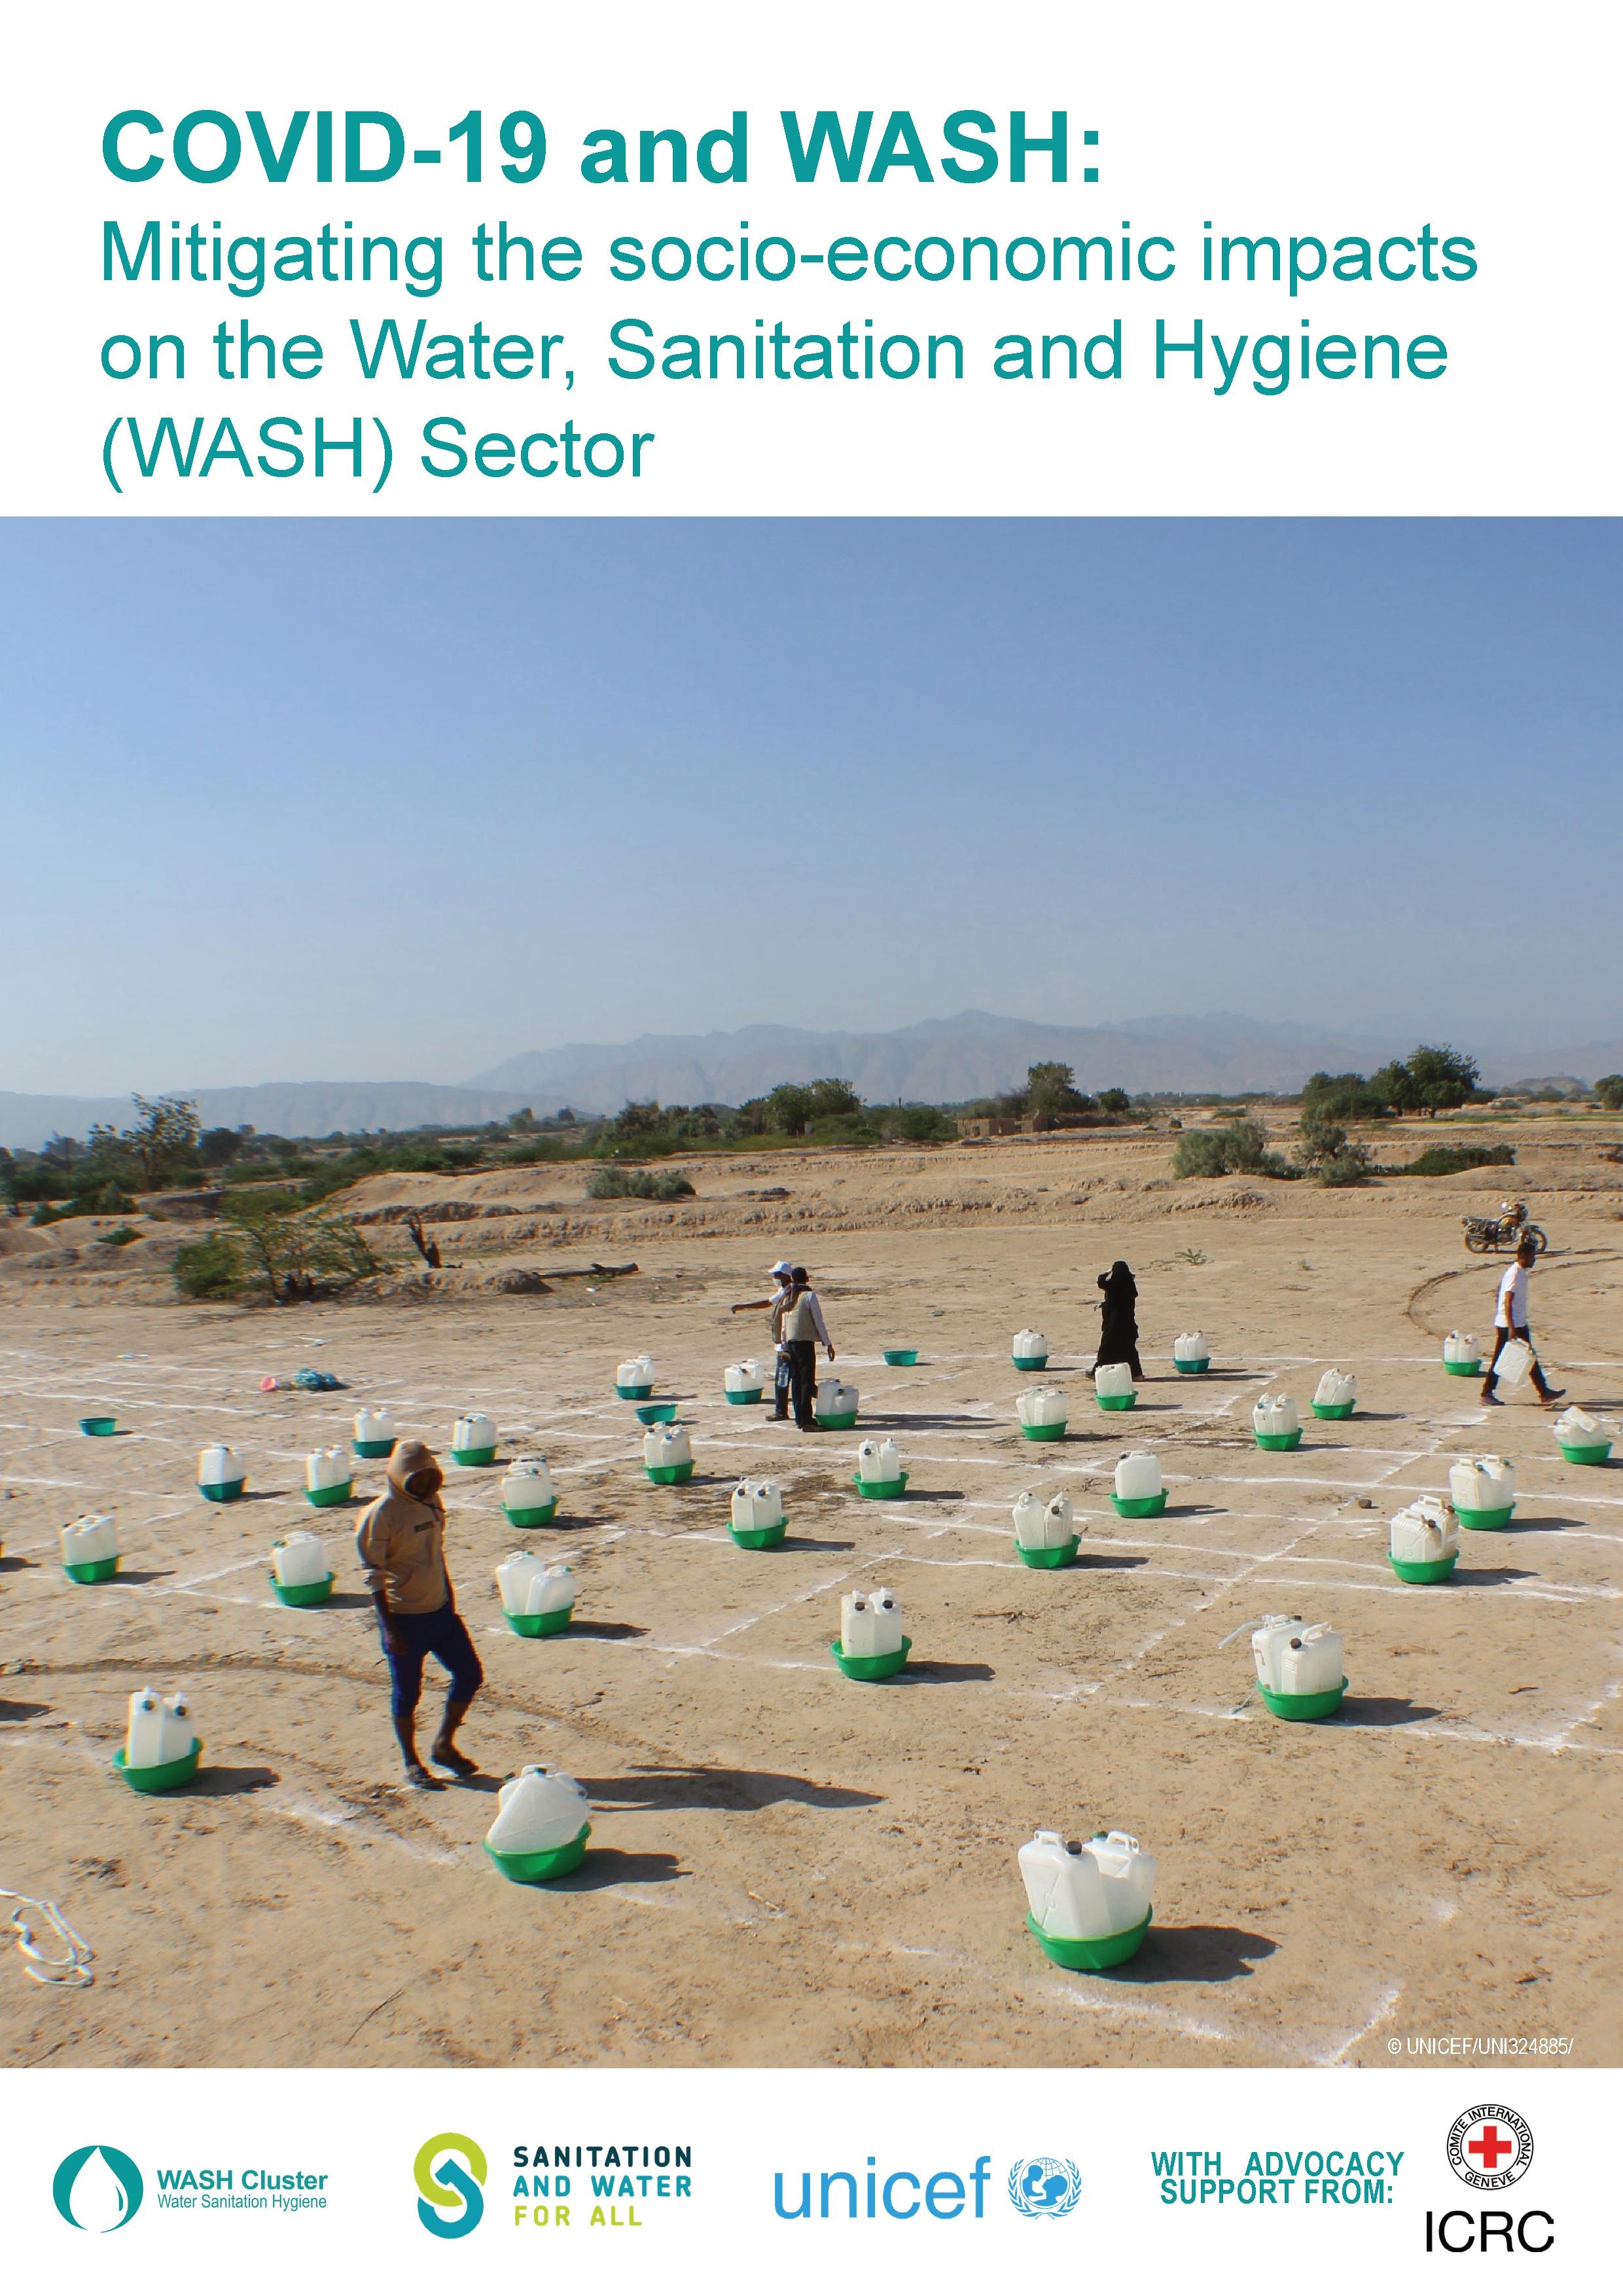 COVID-19 and WASH: Mitigating the socio-economic impacts on the Water, Sanitation and Hygiene (WASH) Sector